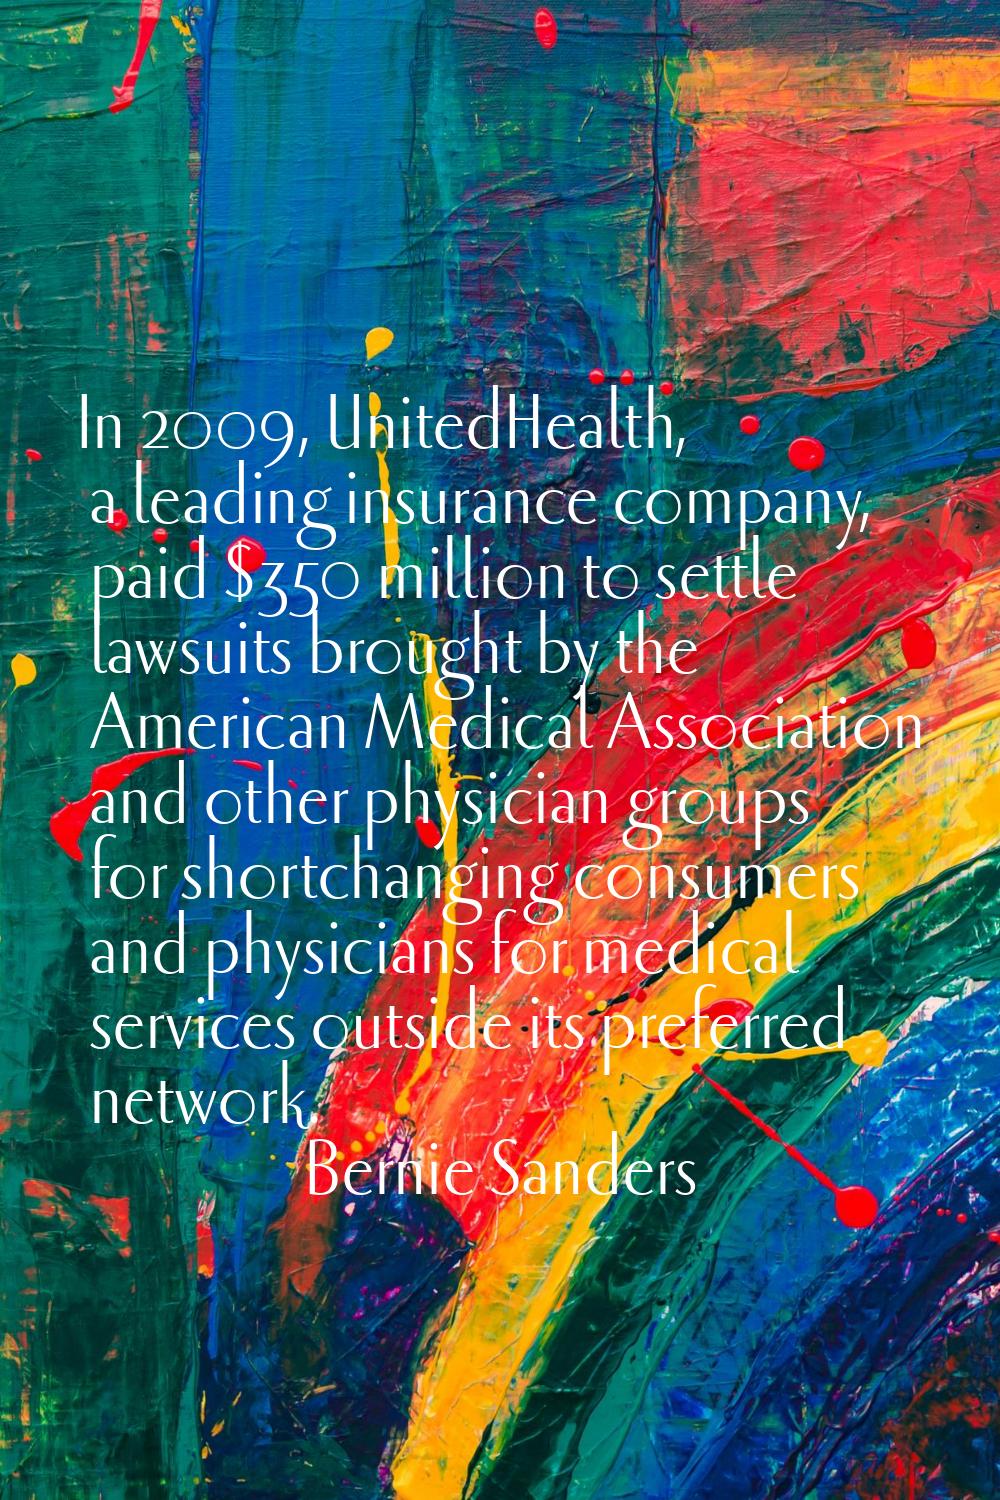 In 2009, UnitedHealth, a leading insurance company, paid $350 million to settle lawsuits brought by